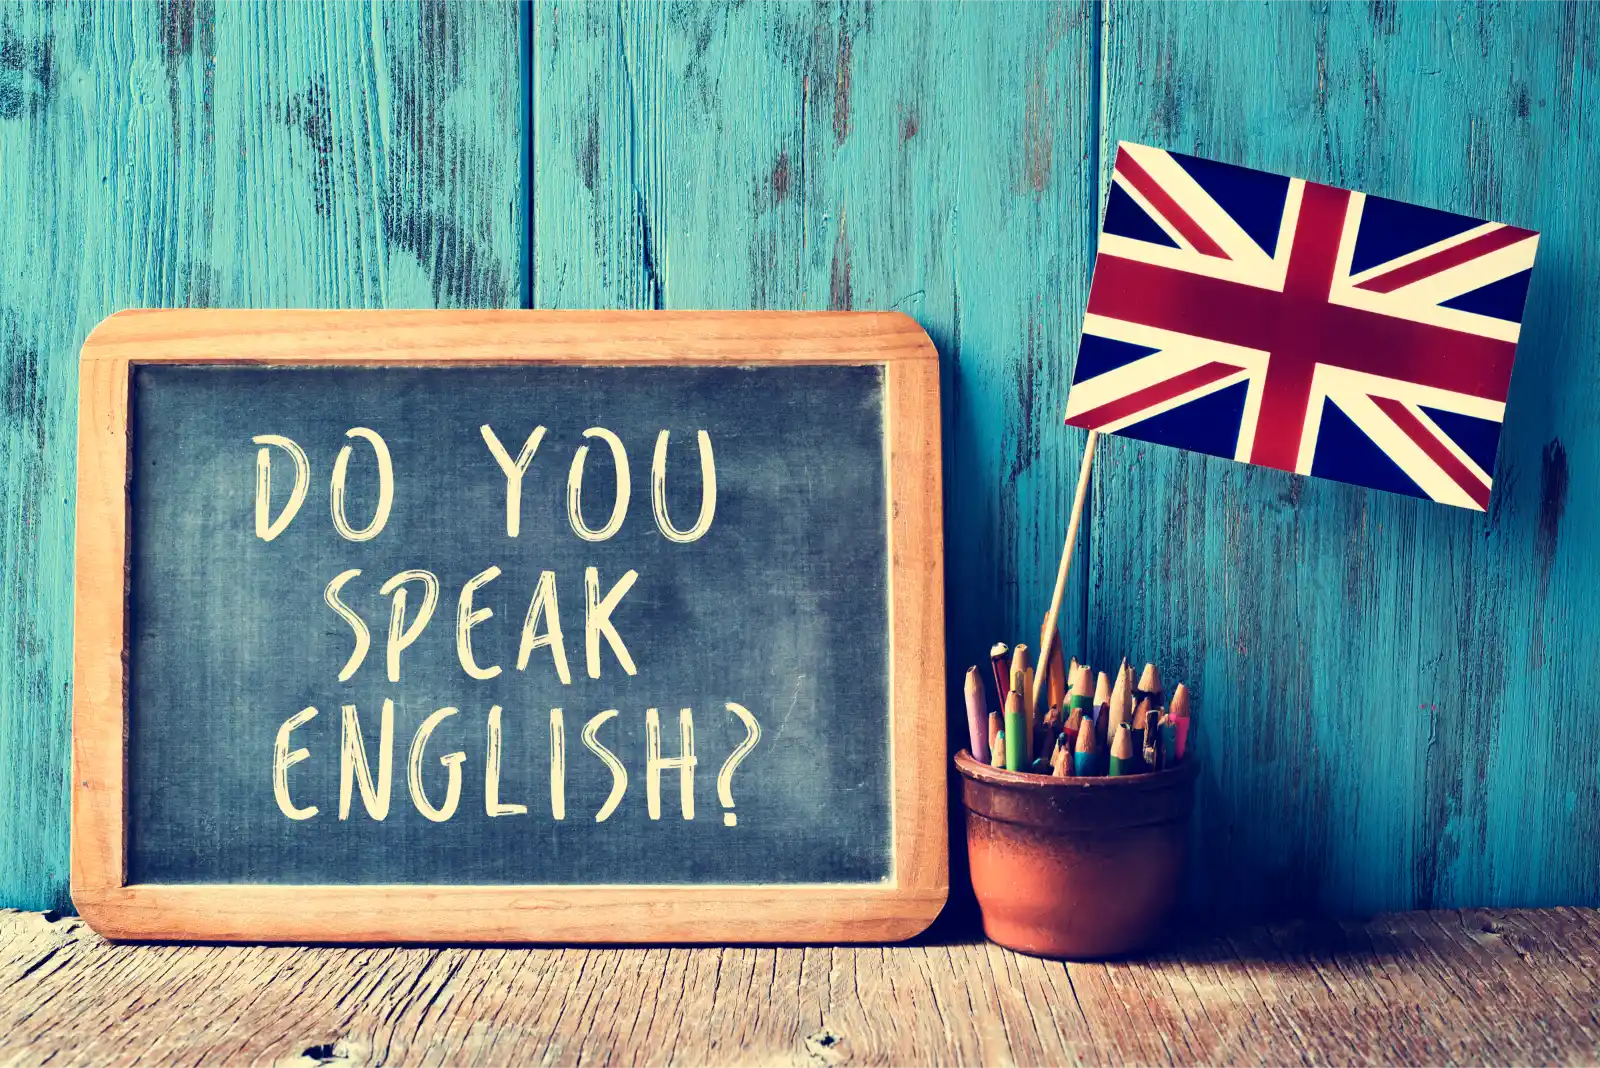 A blackboard with: 'Do you speak English?' written on it in white chalk, with a Union Jack next to it, so as to represent the English Language requirement for a UK visa.